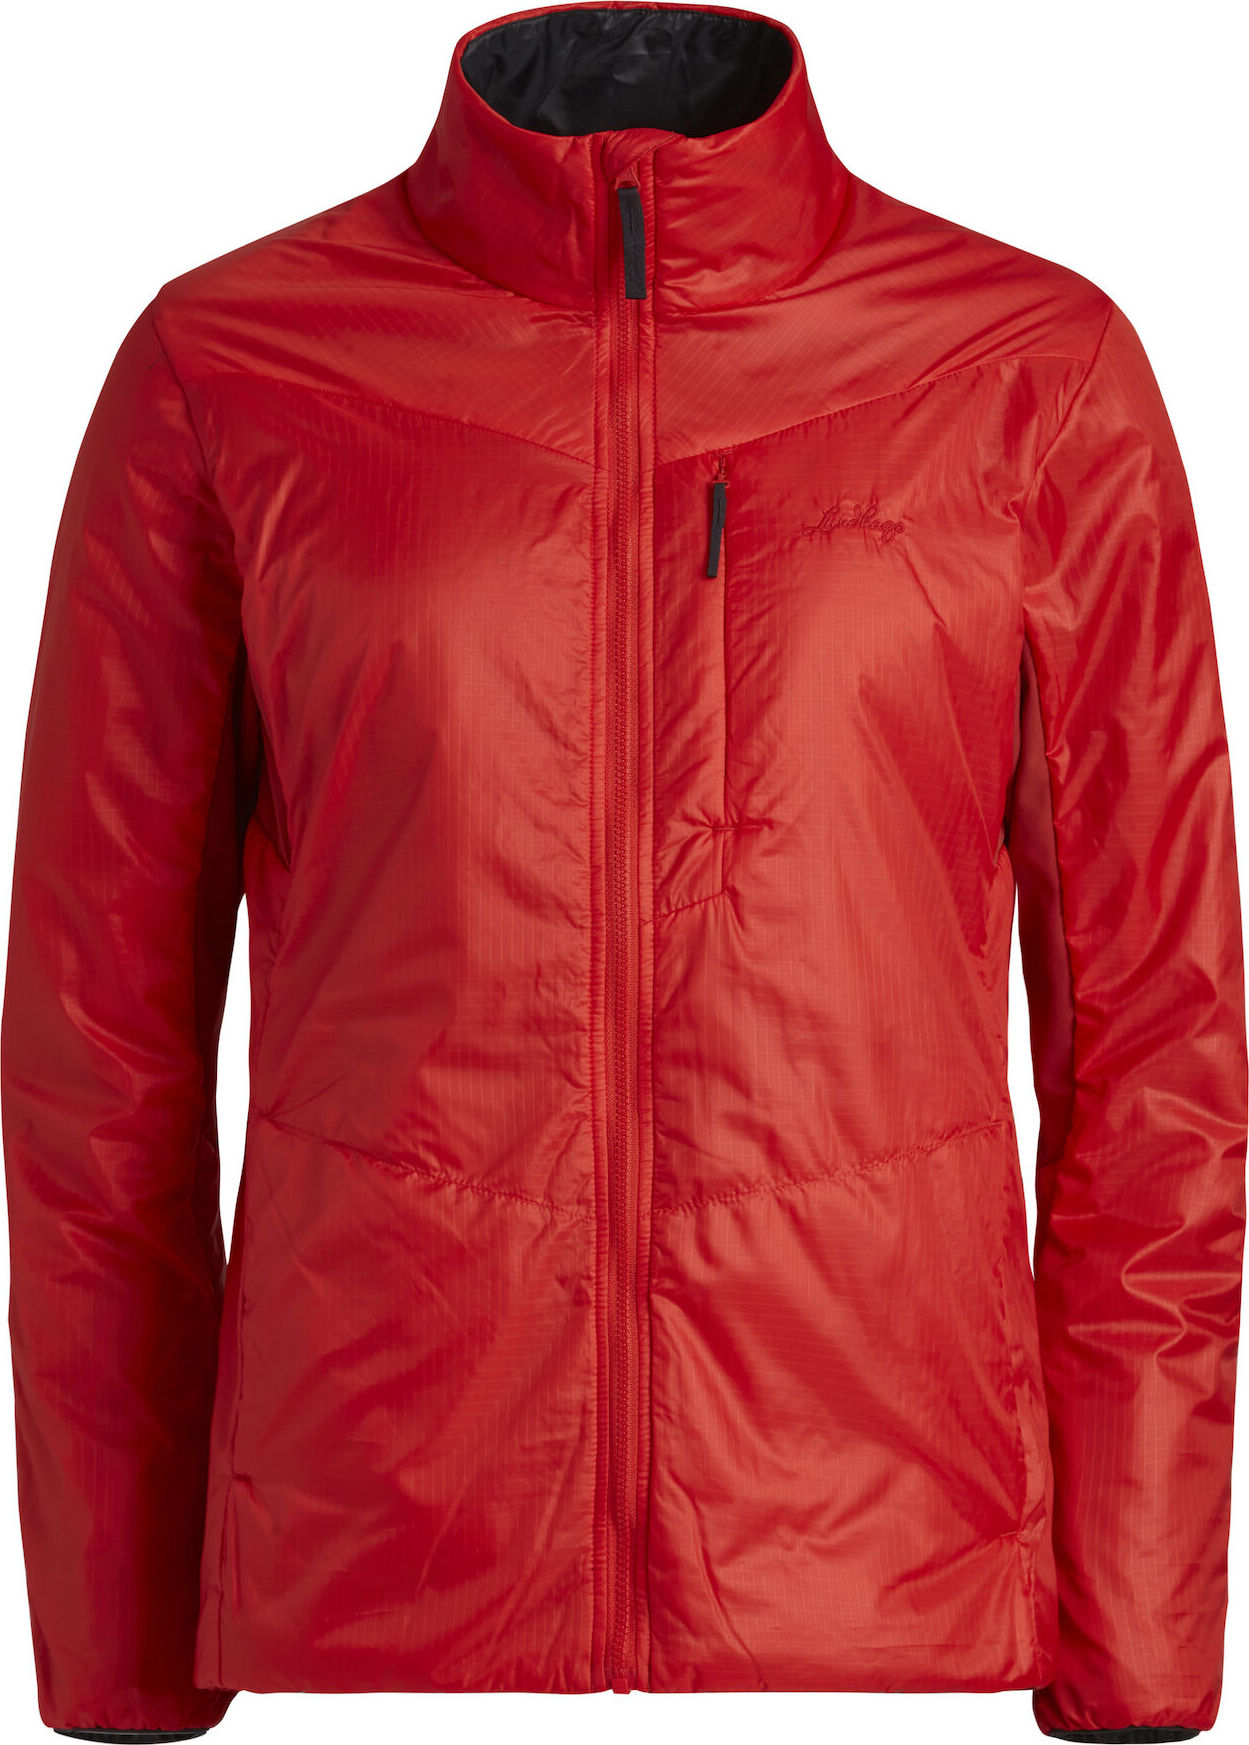 Lundhags Women’s Idu Light Jacket Lively Red